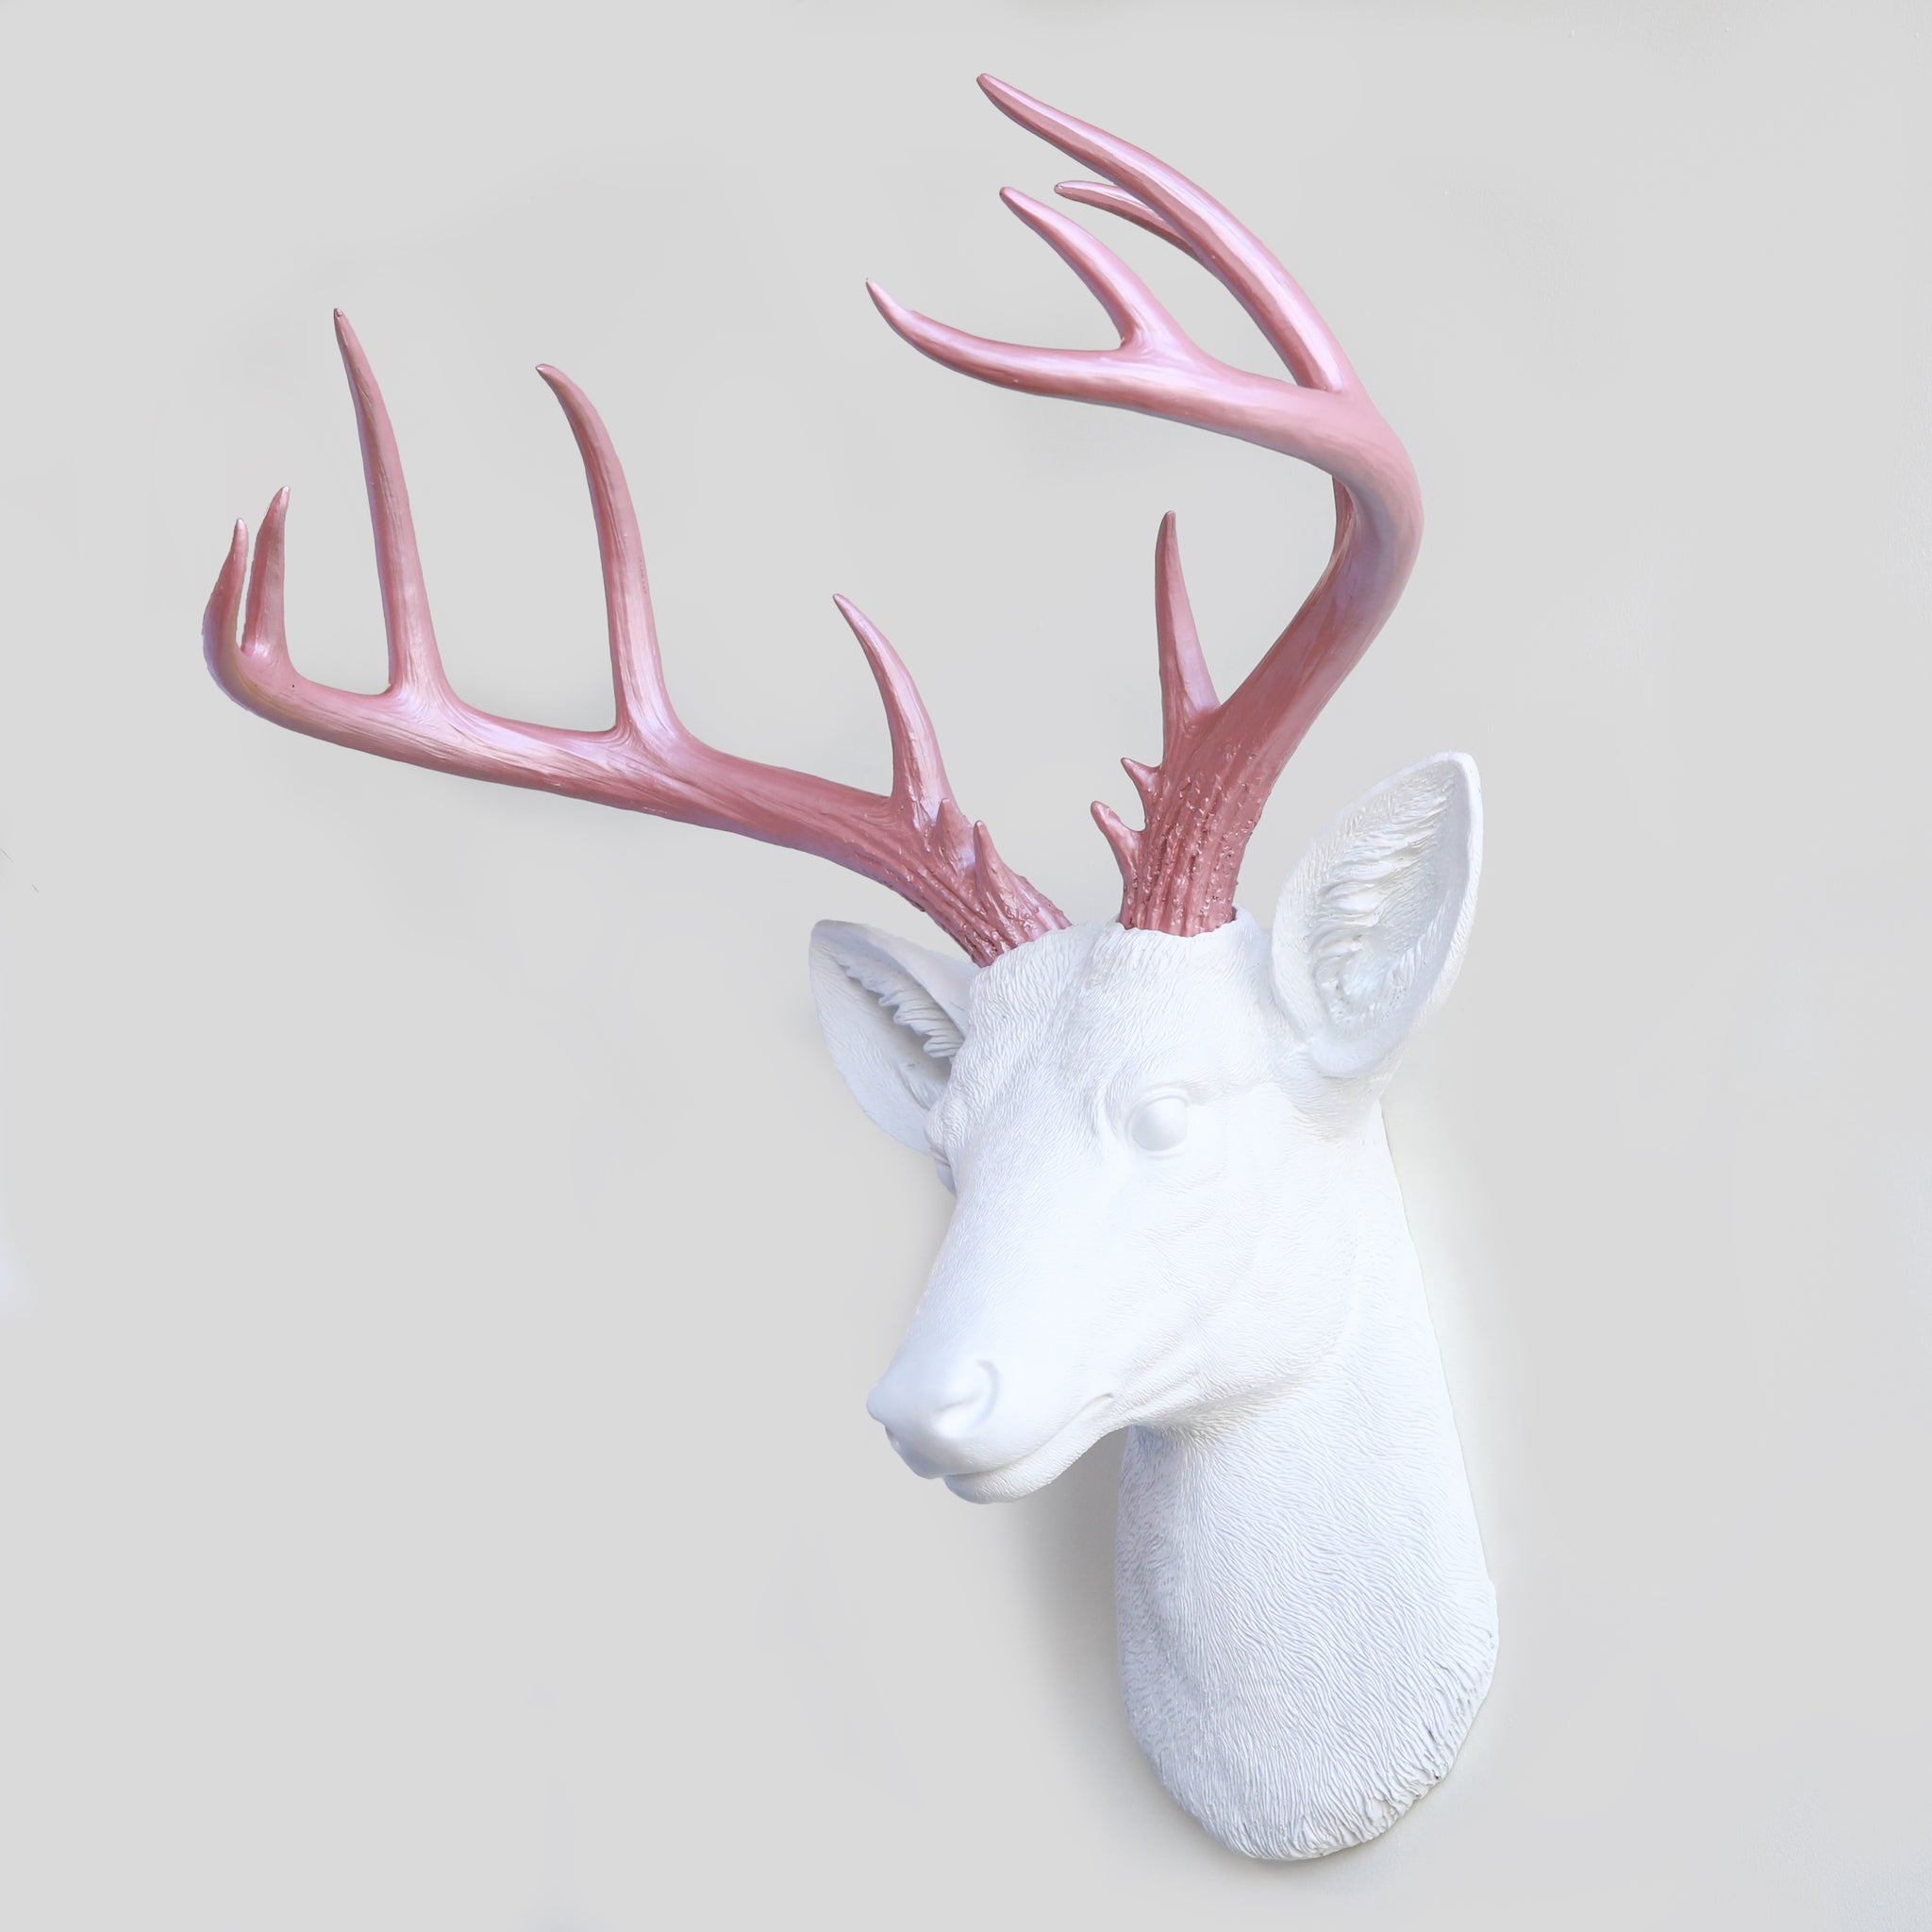 Faux Stag Deer Head Wall Mount // White and Metallic Primrose